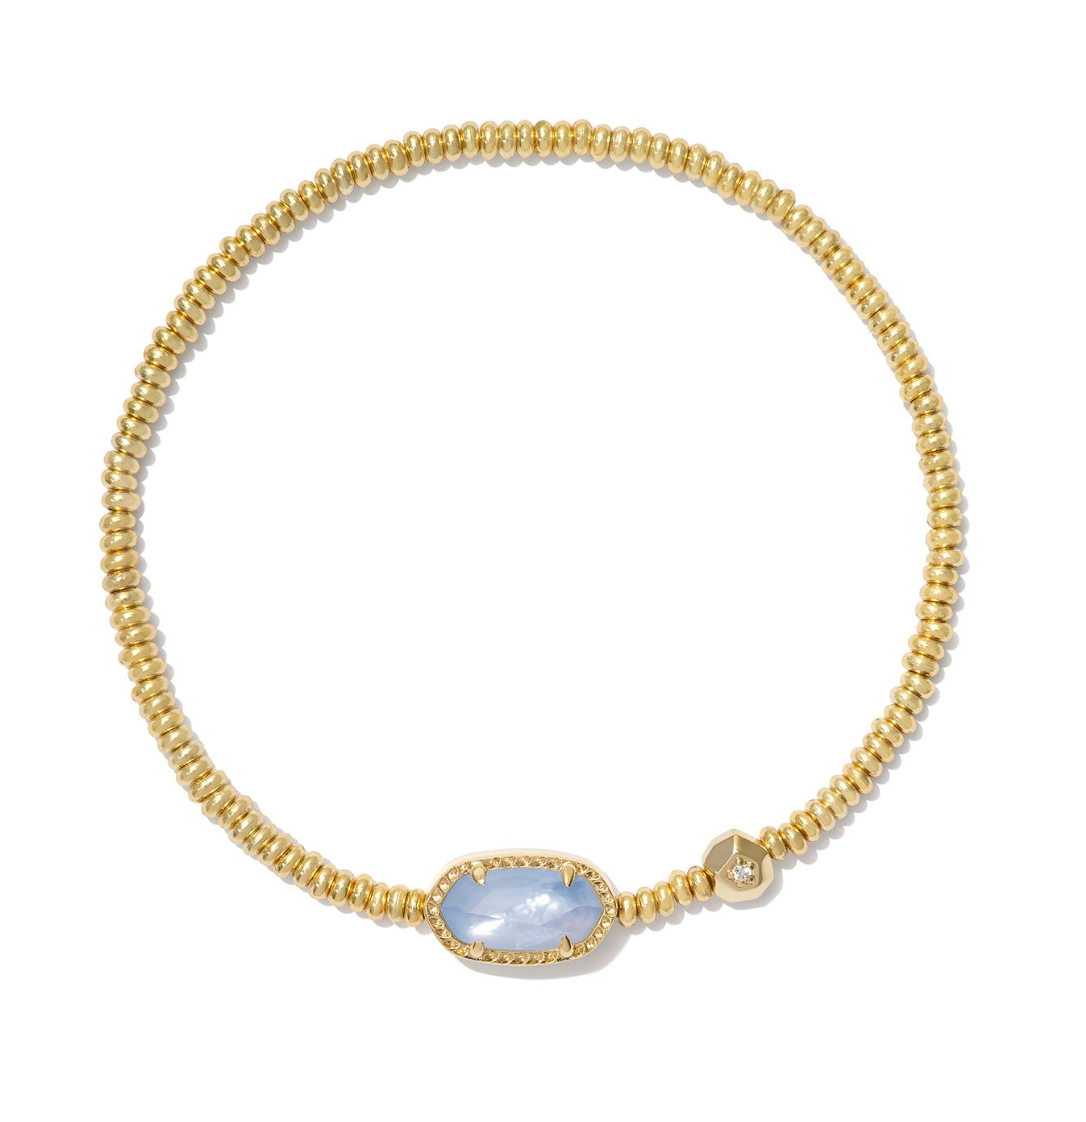 Grayson Gold Stretch Bracelet in Periwinkle Illusion | KENDRA SCOTT - The Street Boutique 